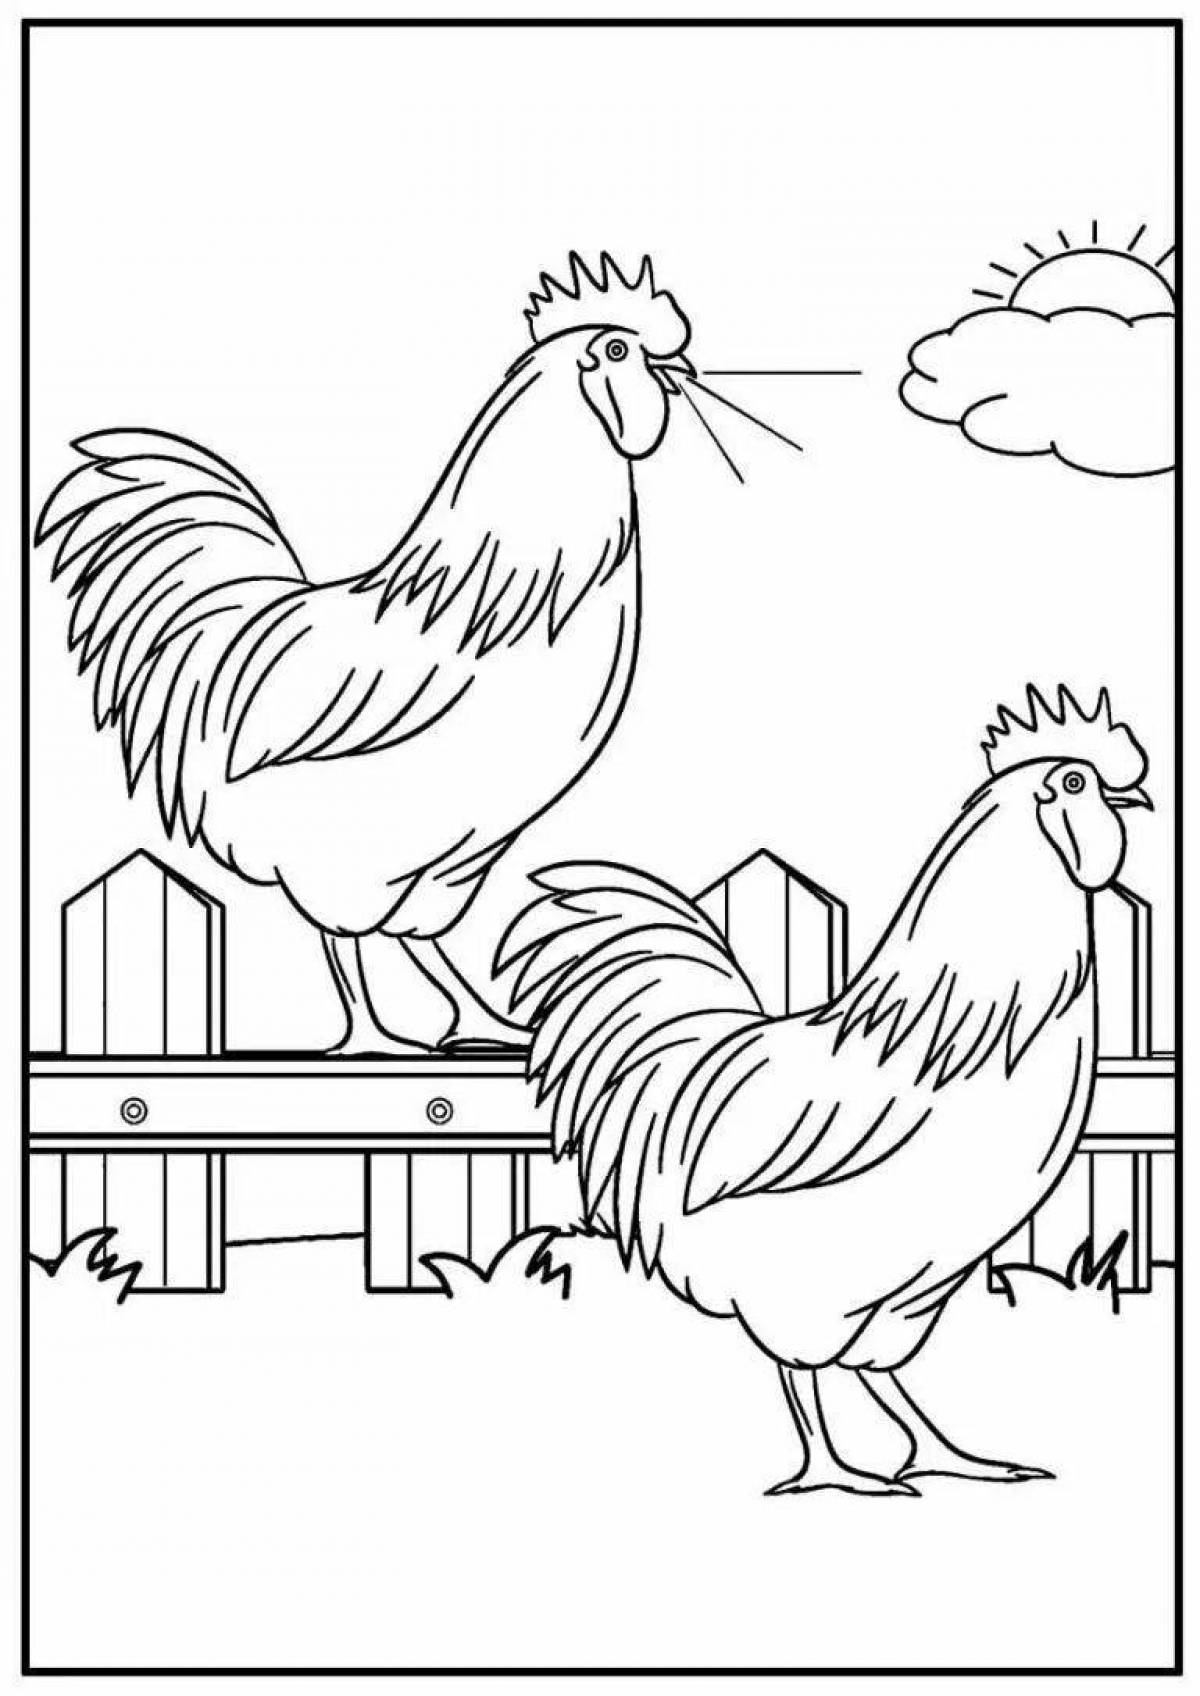 Tempting chicken coop coloring page